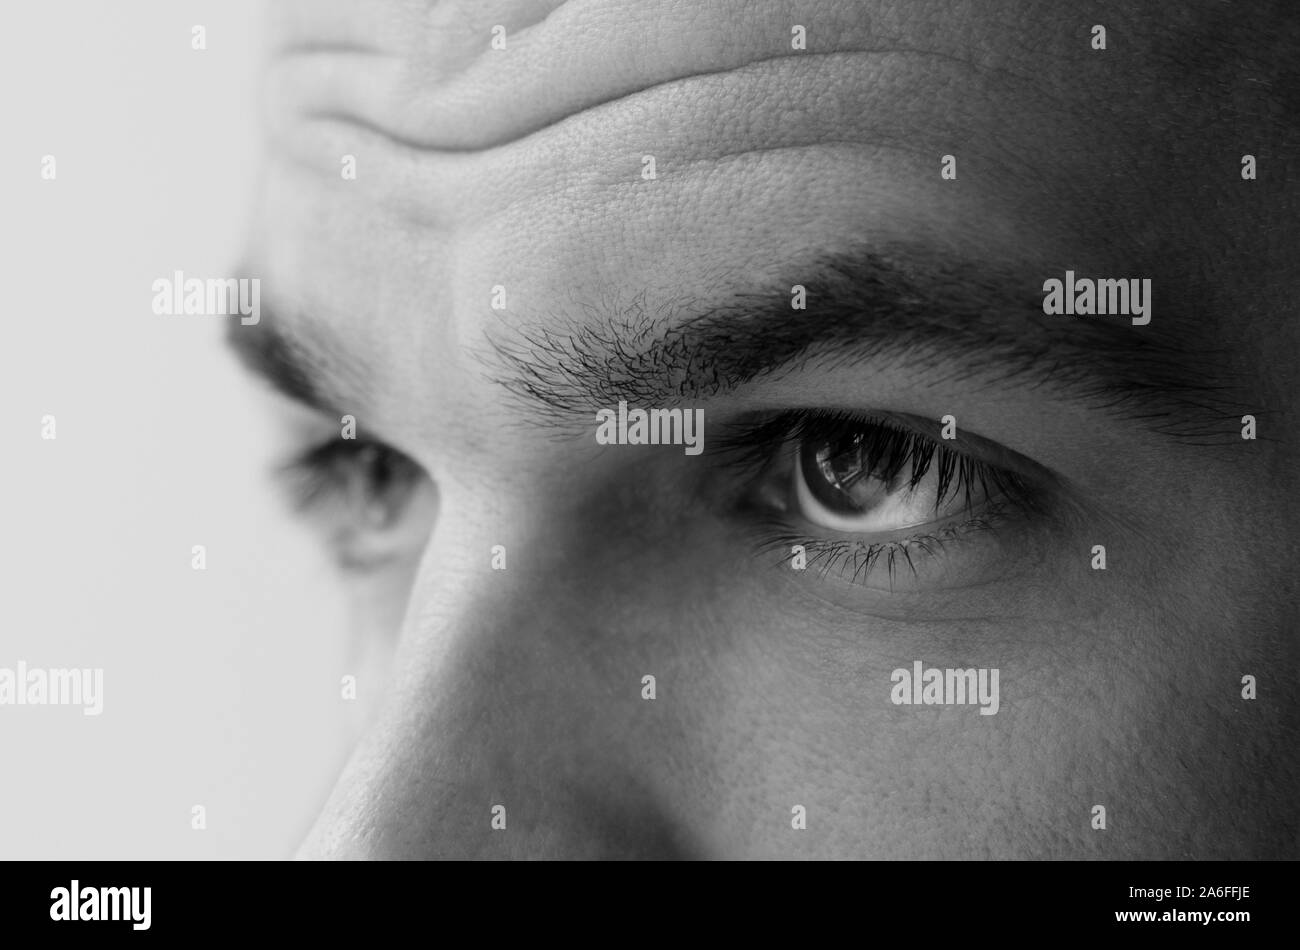 Close up shot of attractive male eyes, thick eyebrows and wrinkled forehead. Black and white photography Stock Photo